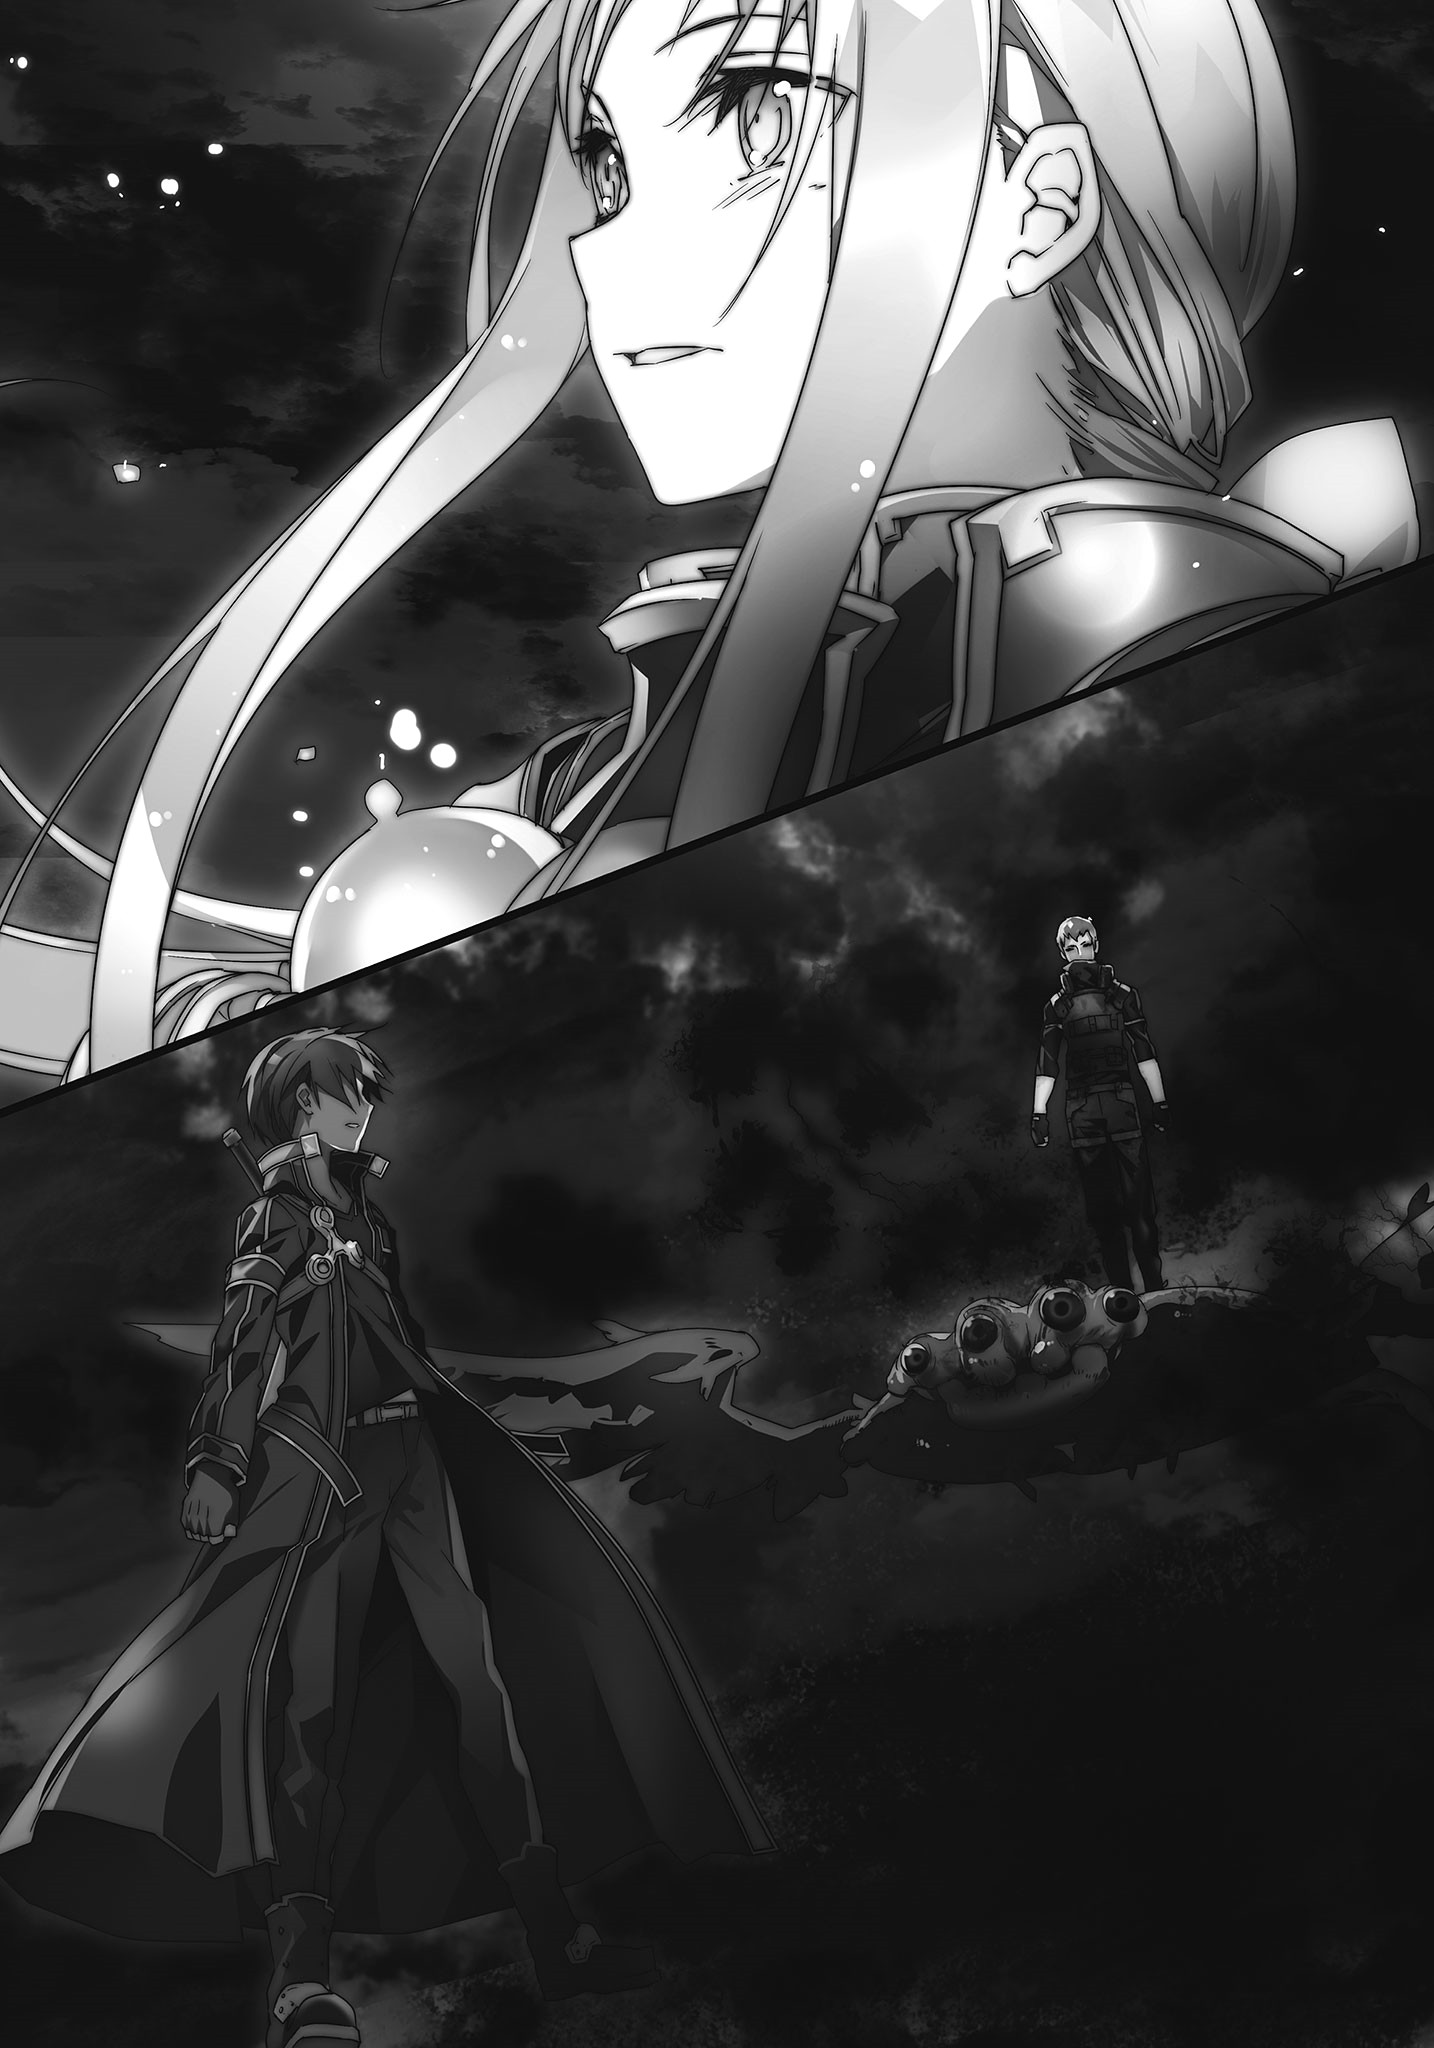 alice getting taken away by integrity knight deusolbert synthesis seven alice helping kirito in